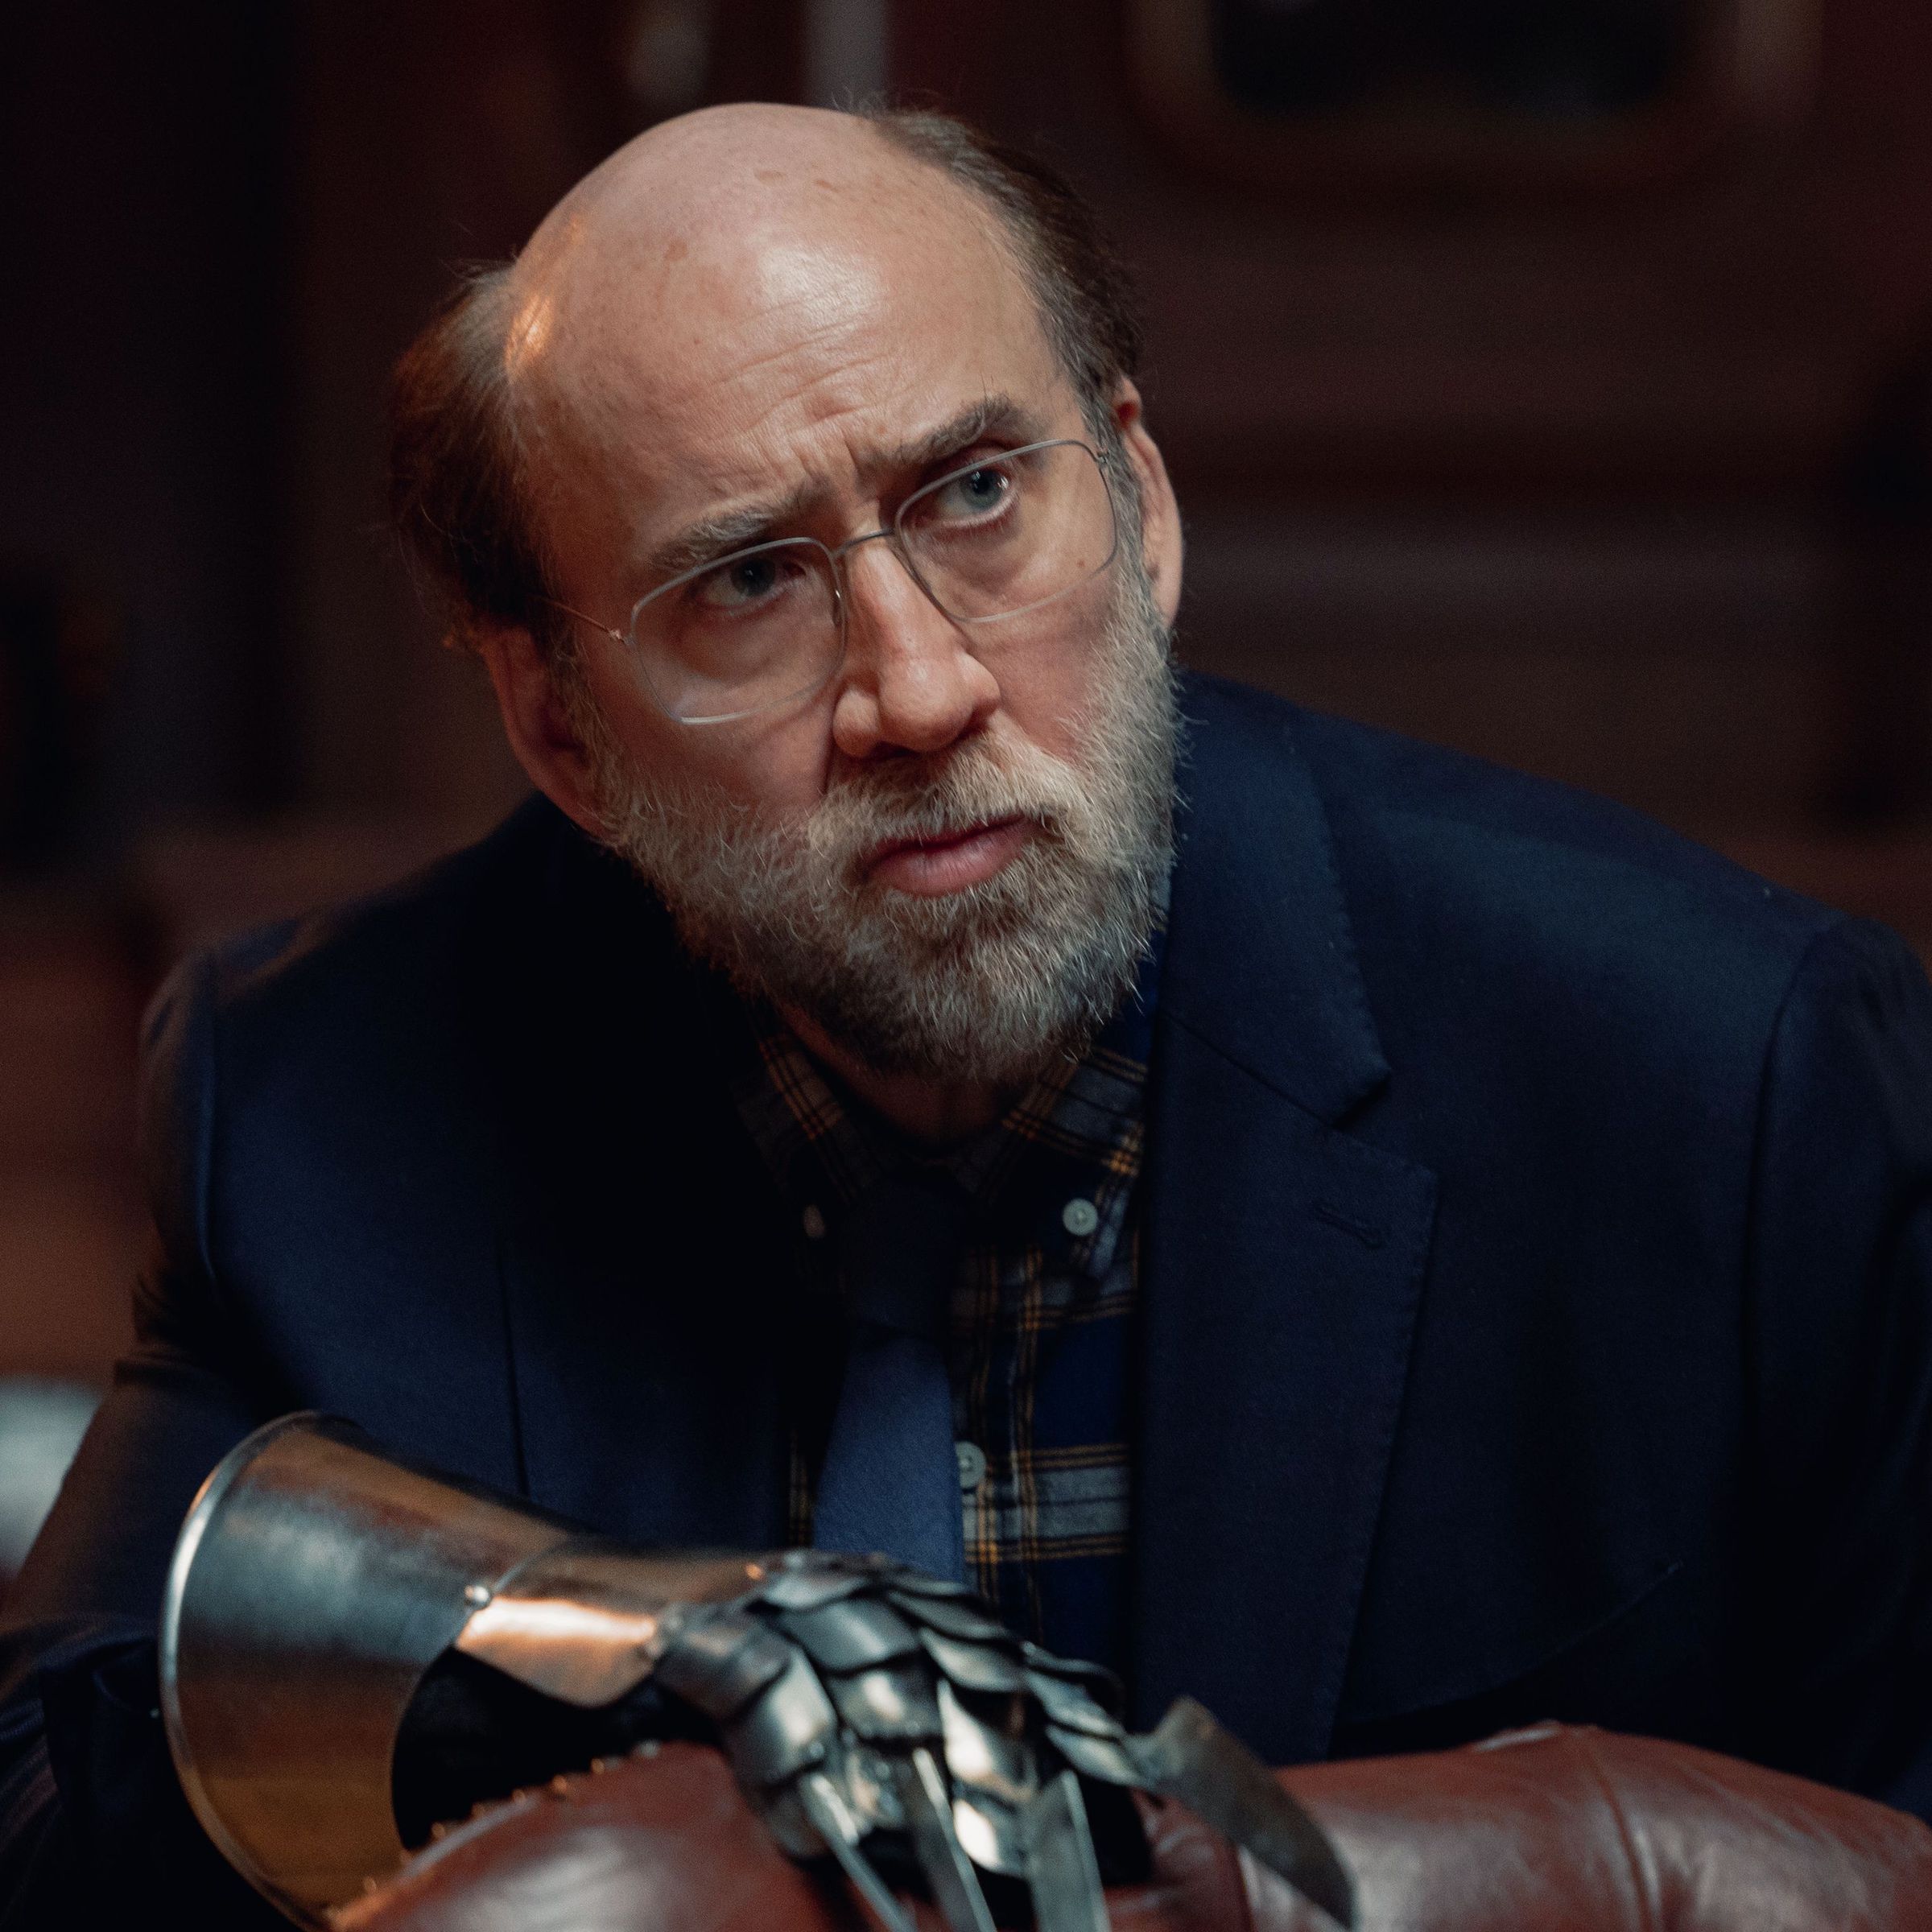 A balding middle-aged man wearing glasses, a blue suit, and an armored glove on one hand as he leans over to rest his arm on the back of a leather chair.